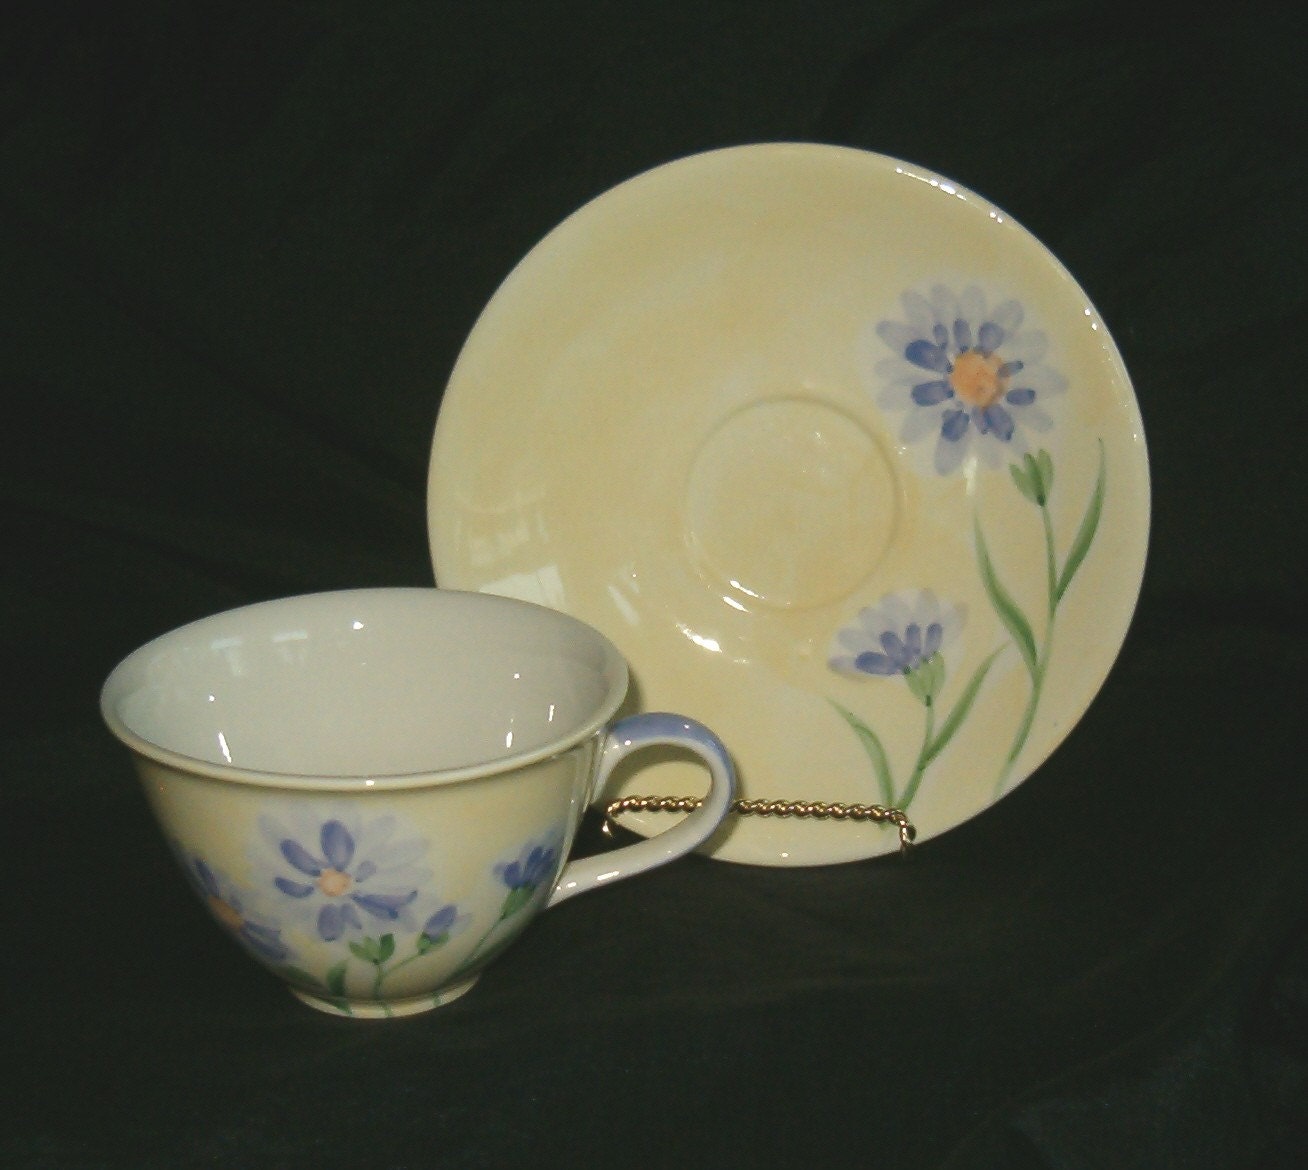 Yellow Purple Lavender Floral Ceramic Teacup Saucer Plate Herman Dodge and Son Inc